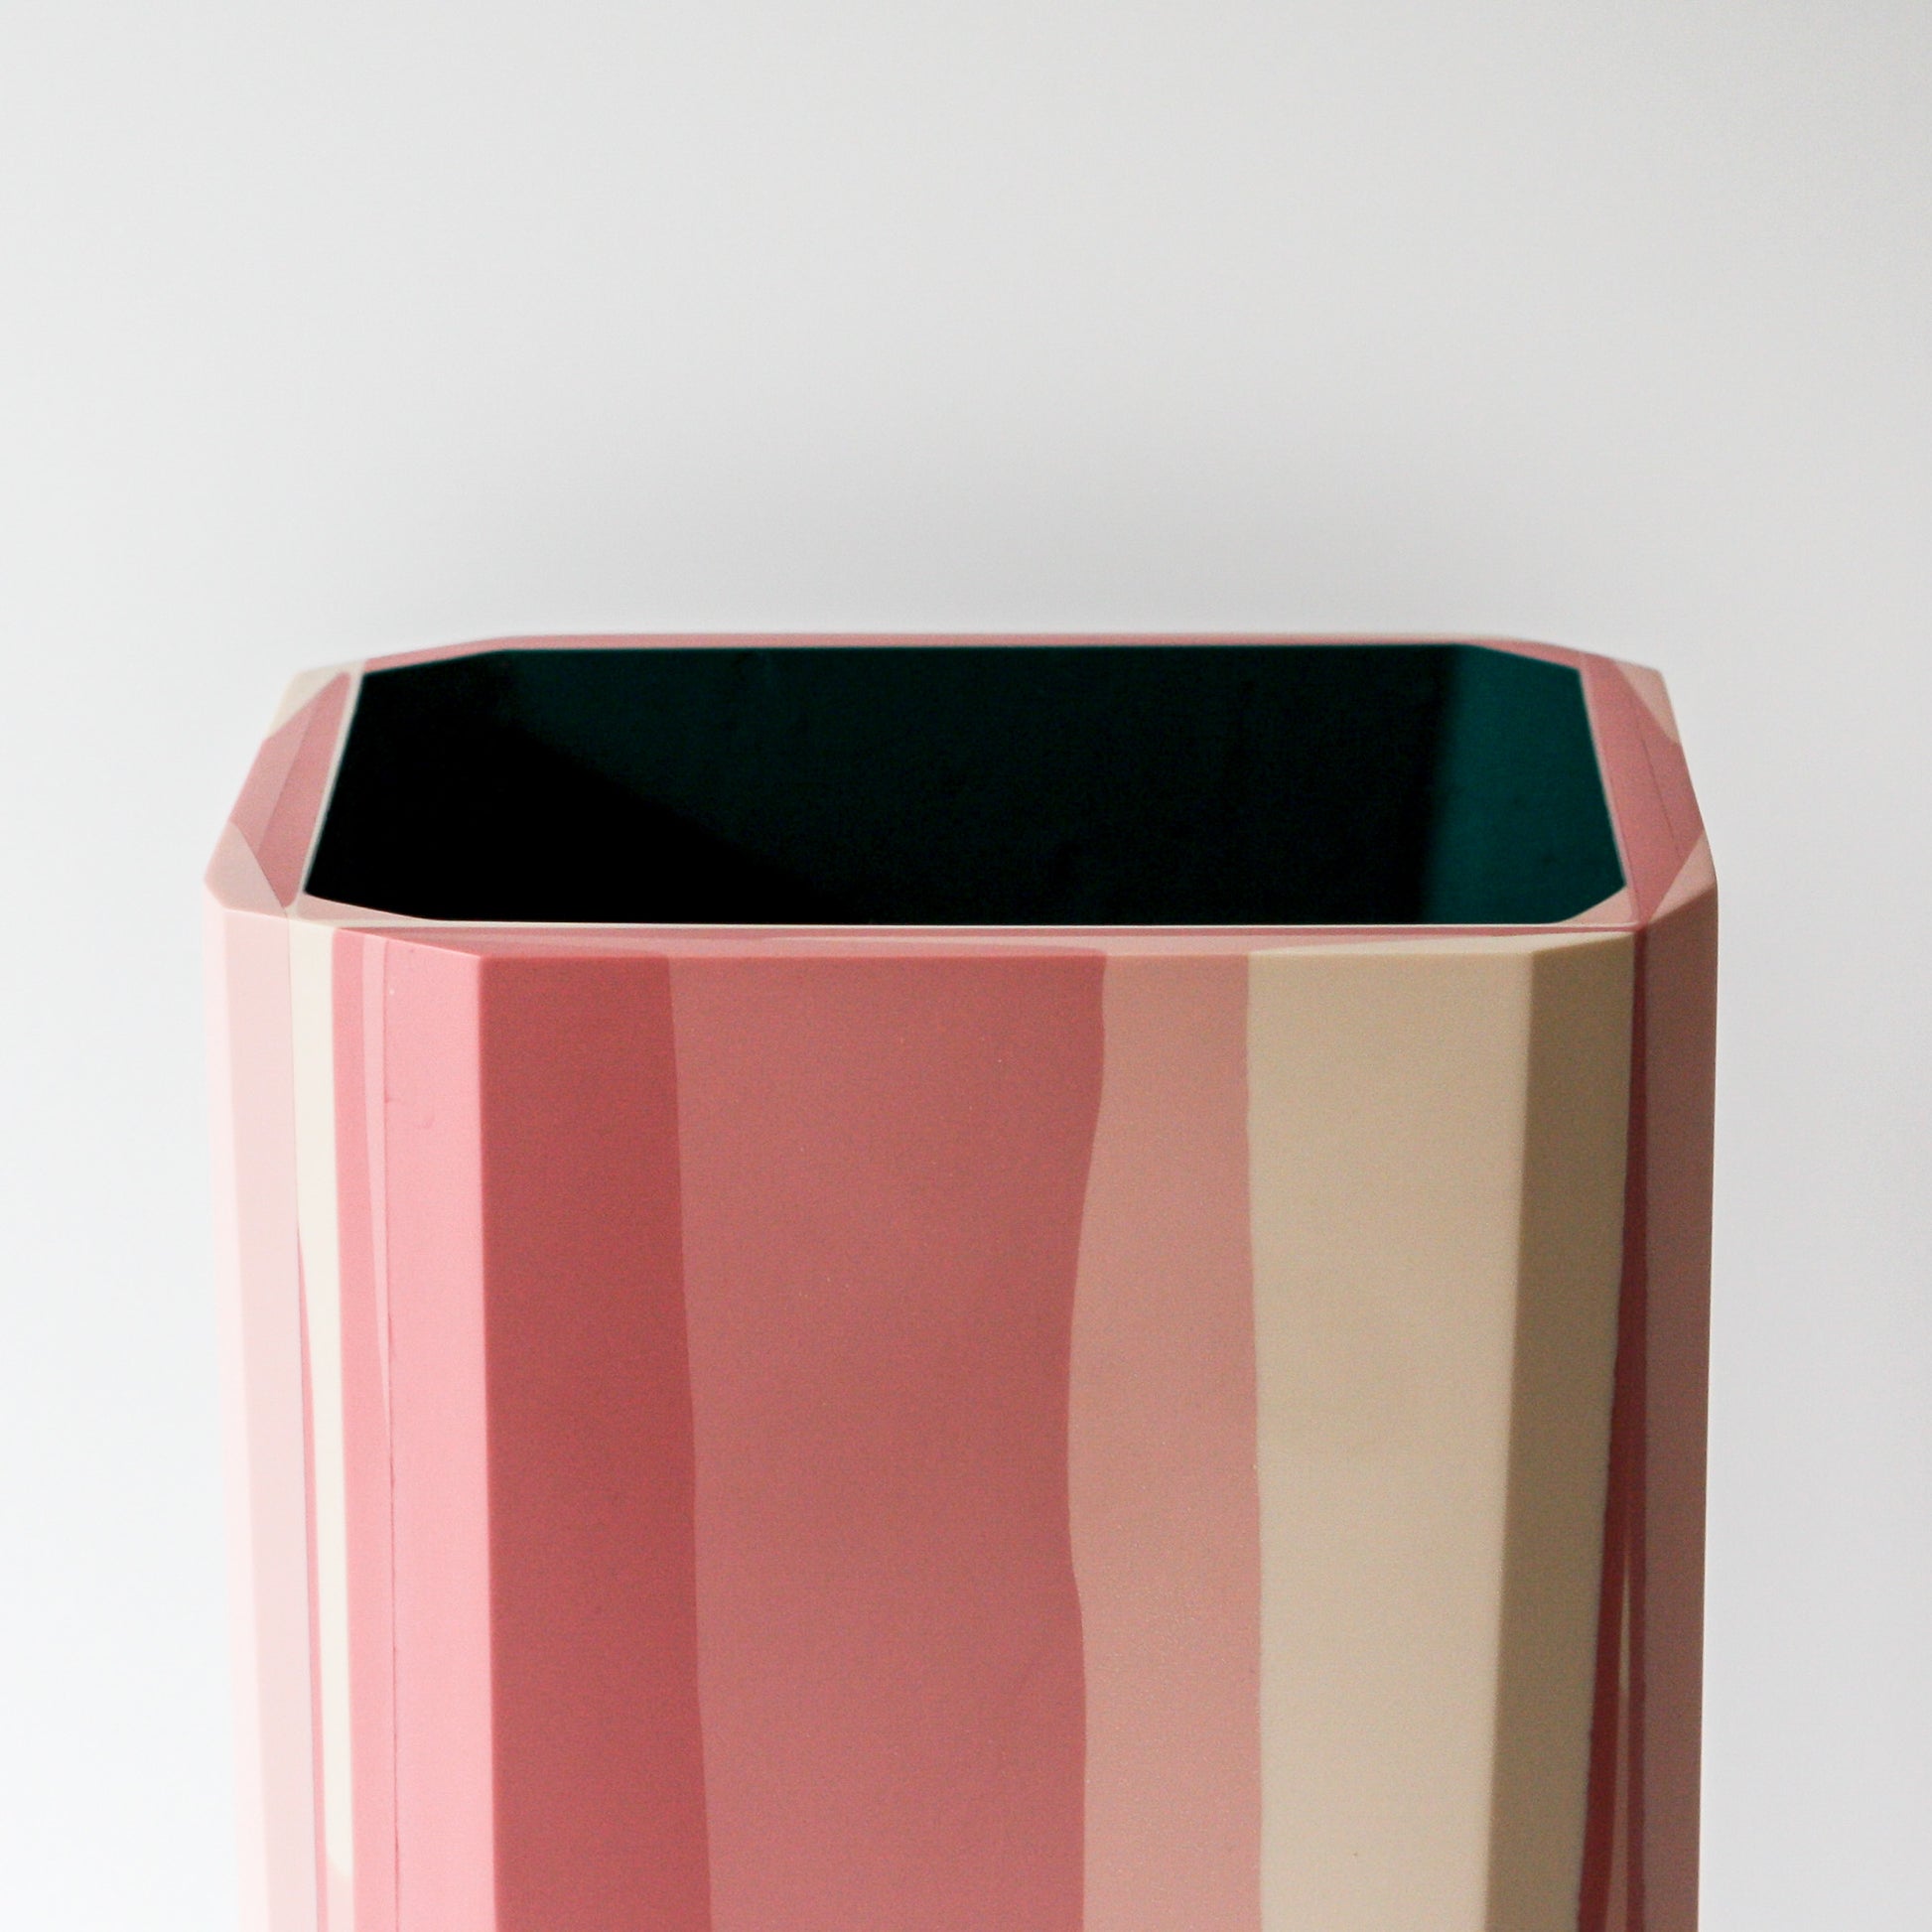 Mecca Vase handmade with resin and plaster in pink and teal part of the Anyon and Elyse Graham Blithe Collection